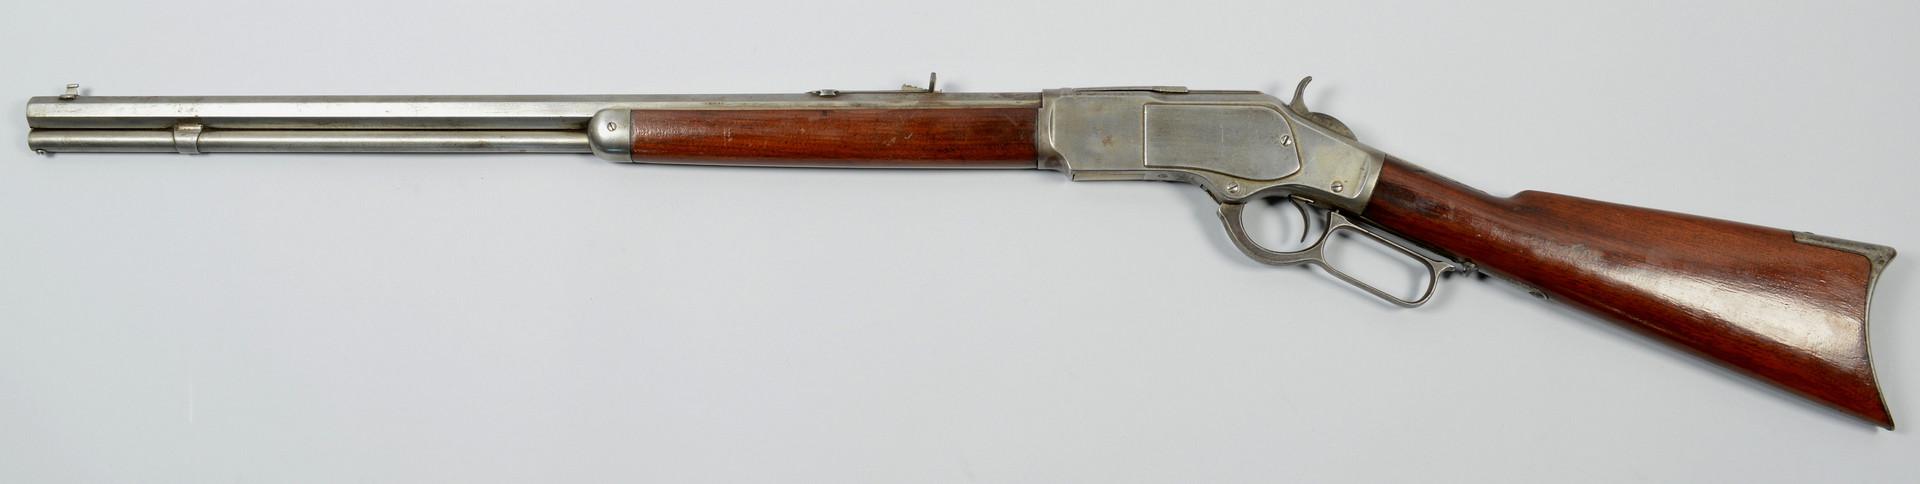 Lot 414: 1873 Winchester Rifle, .32 Cal, nickel finish